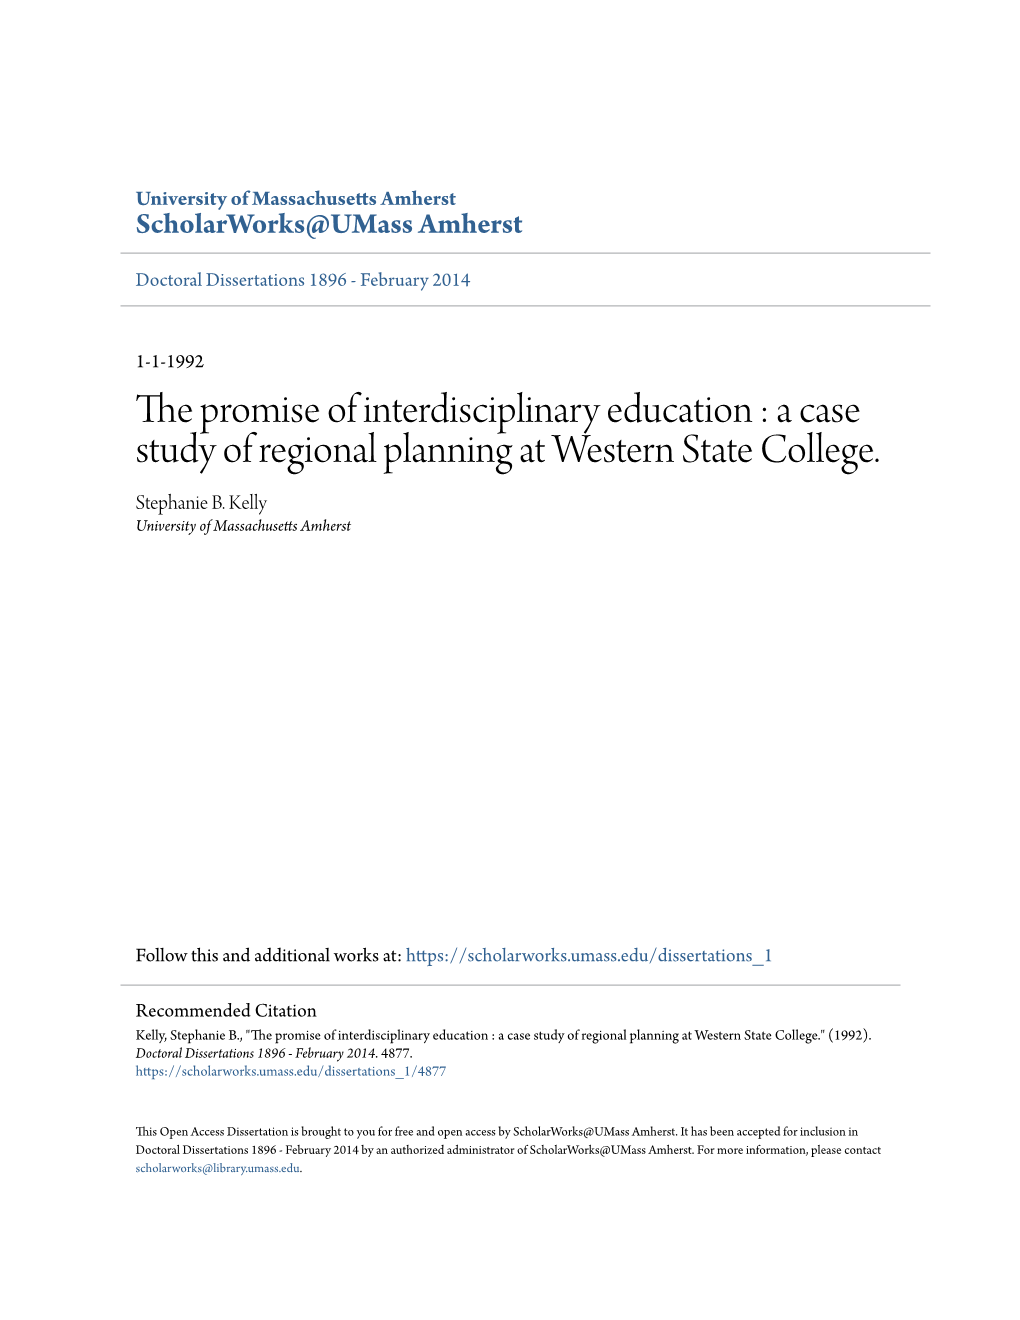 The Promise of Interdisciplinary Education : a Case Study of Regional Planning at Western State College